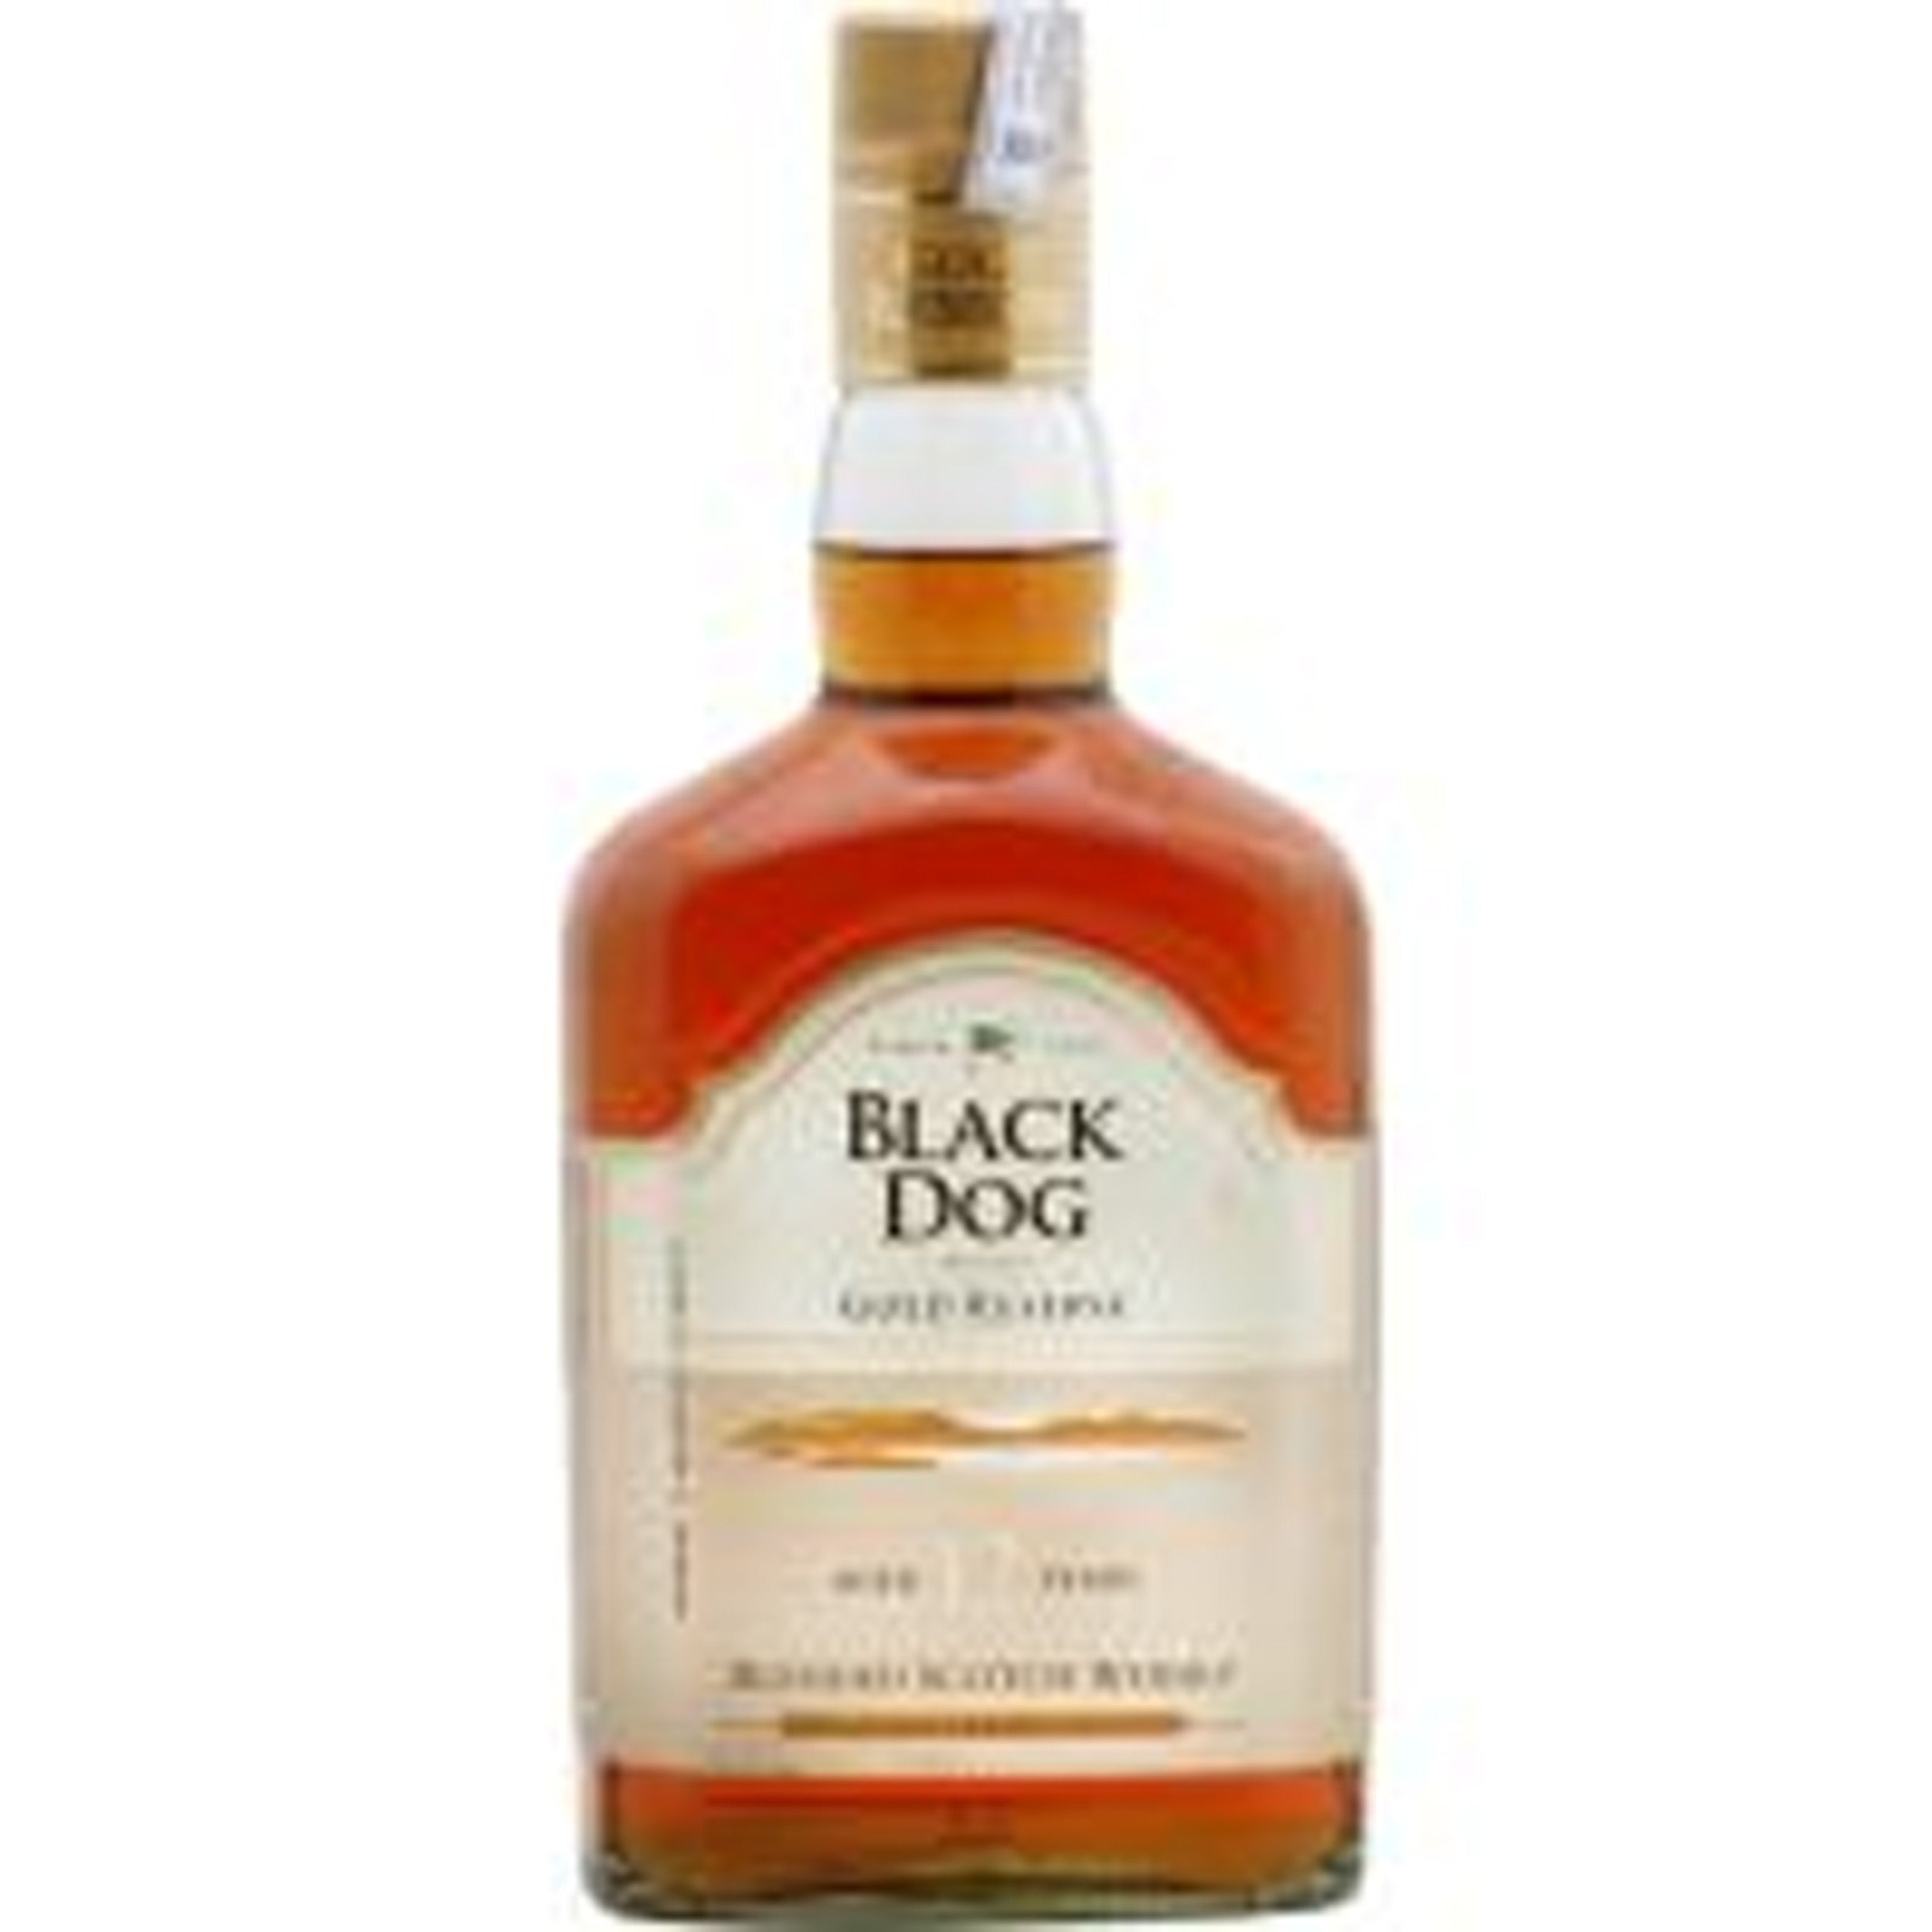 Black Dog 12 Year Old Deluxe Gold Reserve Blended Scotch Whisky